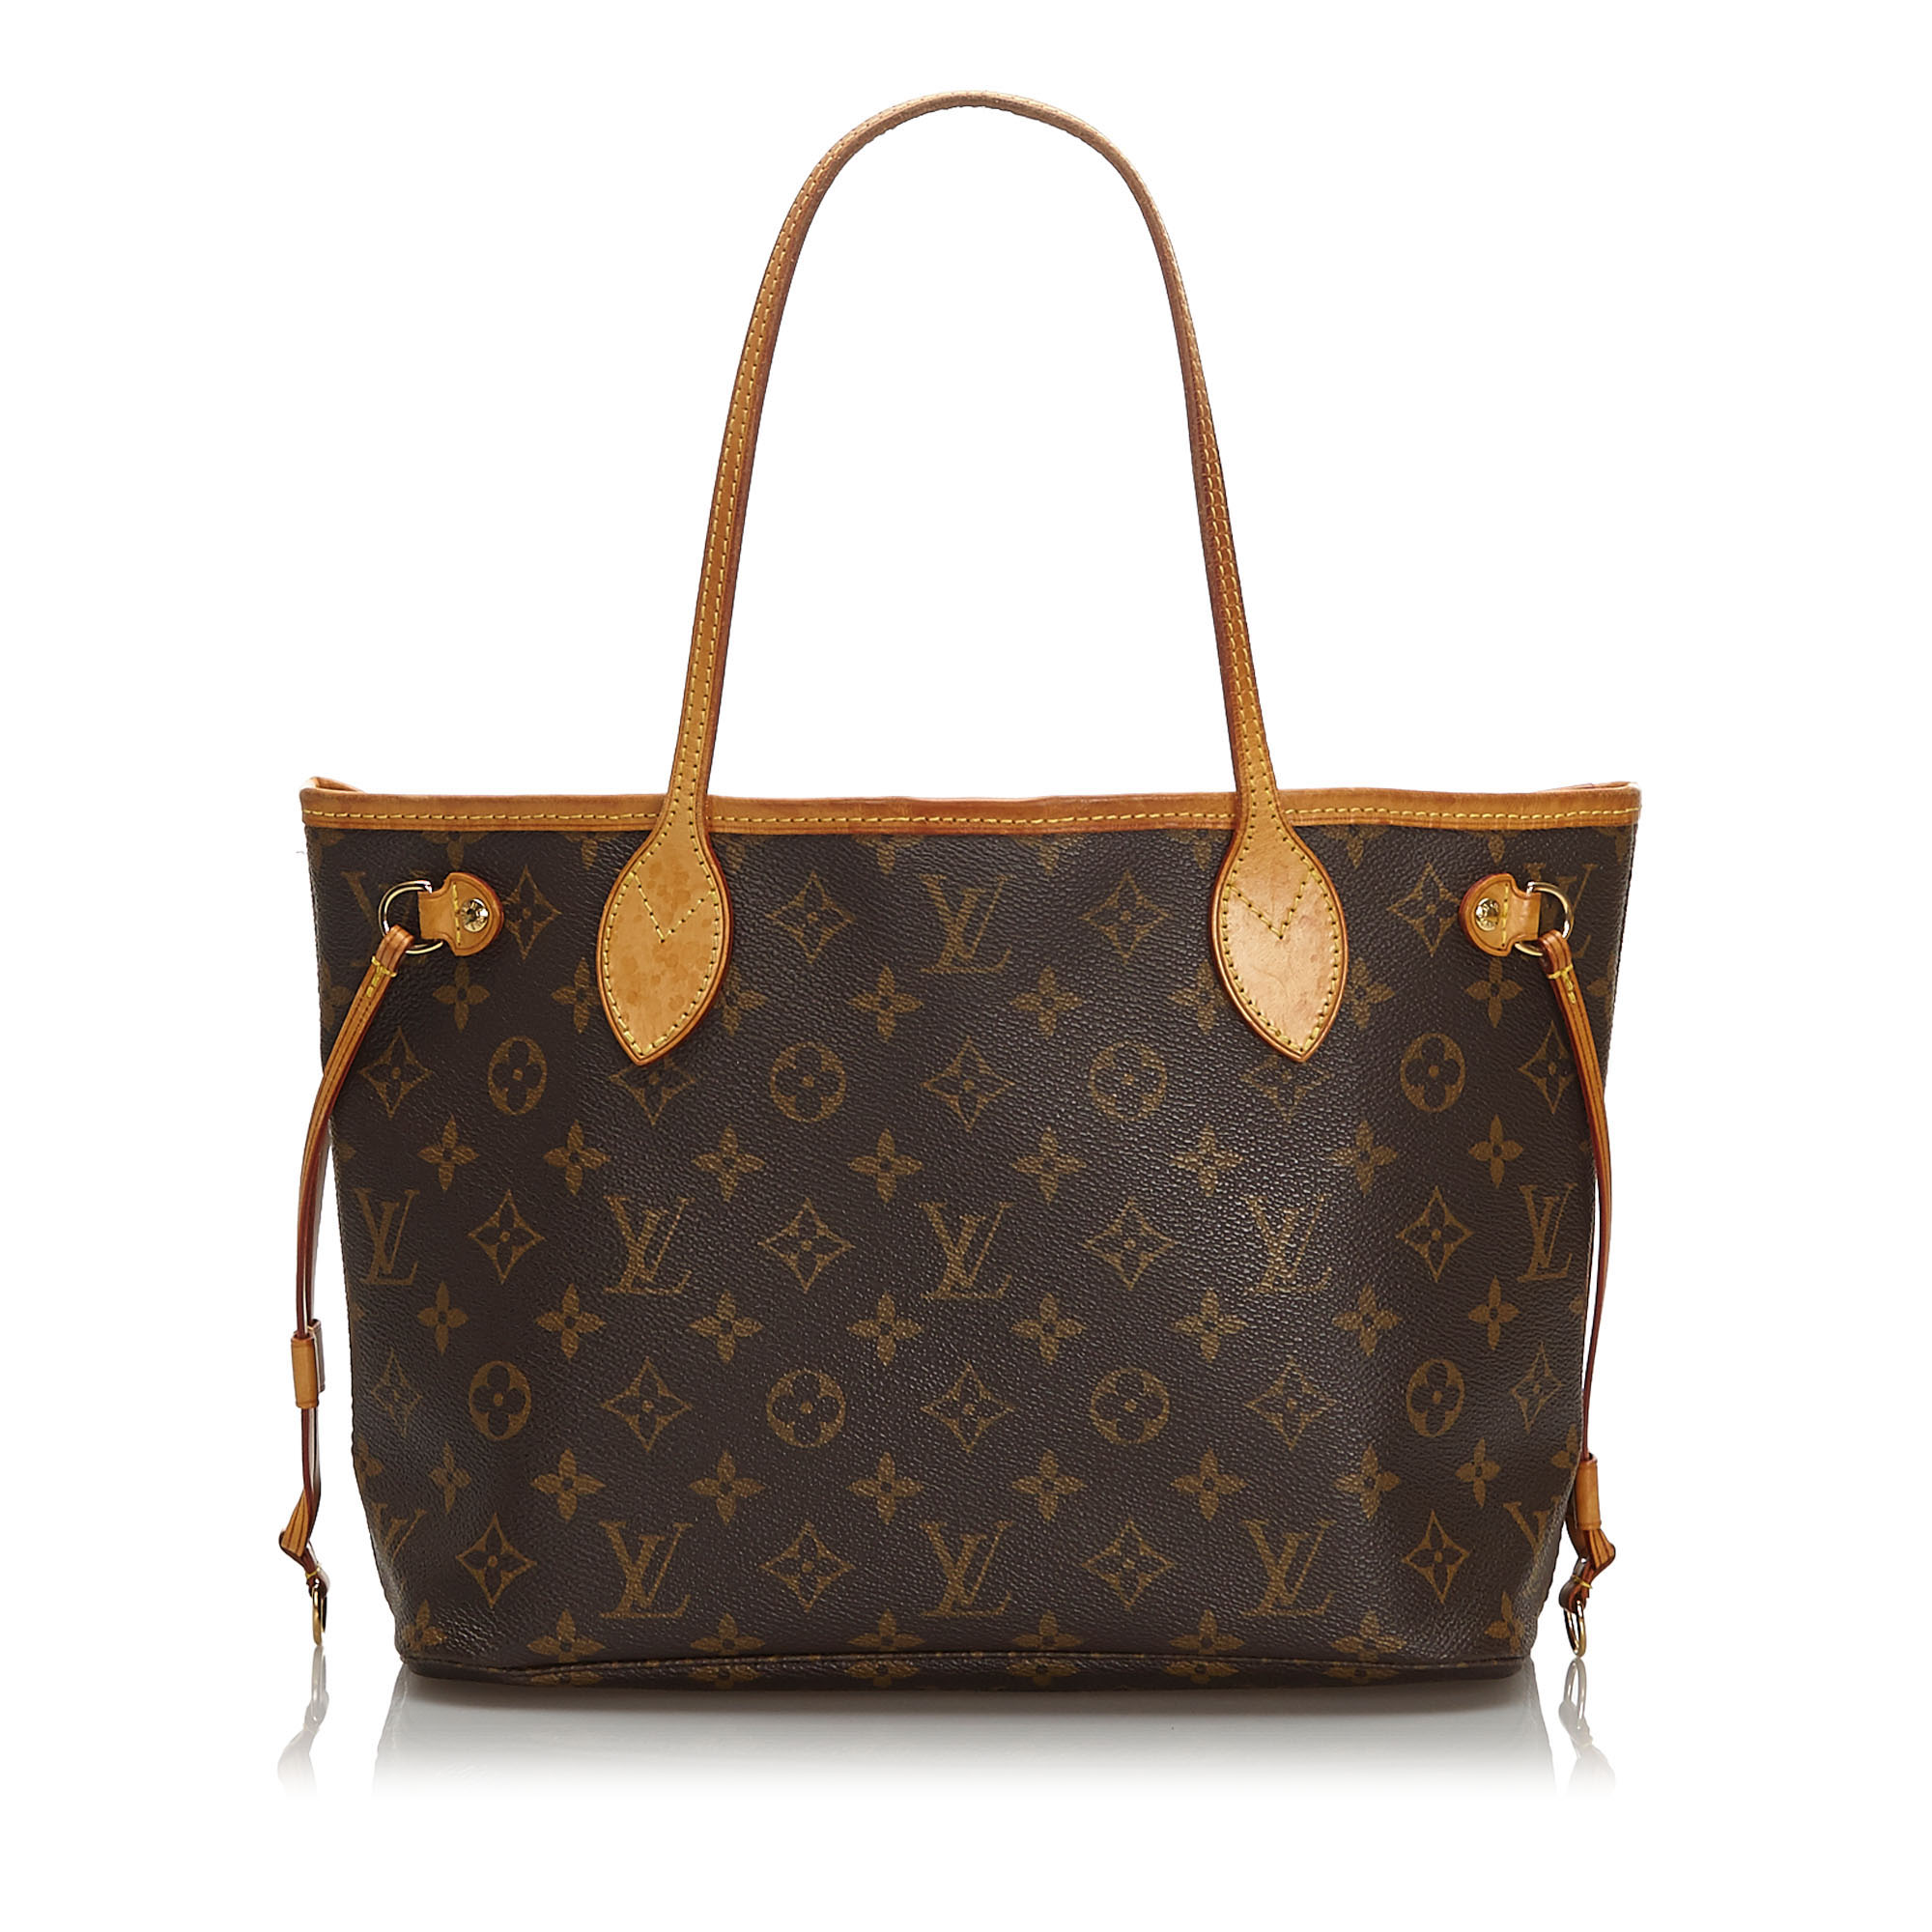 Pre-Loved Louis Vuitton Brown Monogram Canvas Neverfull PM France | eBay